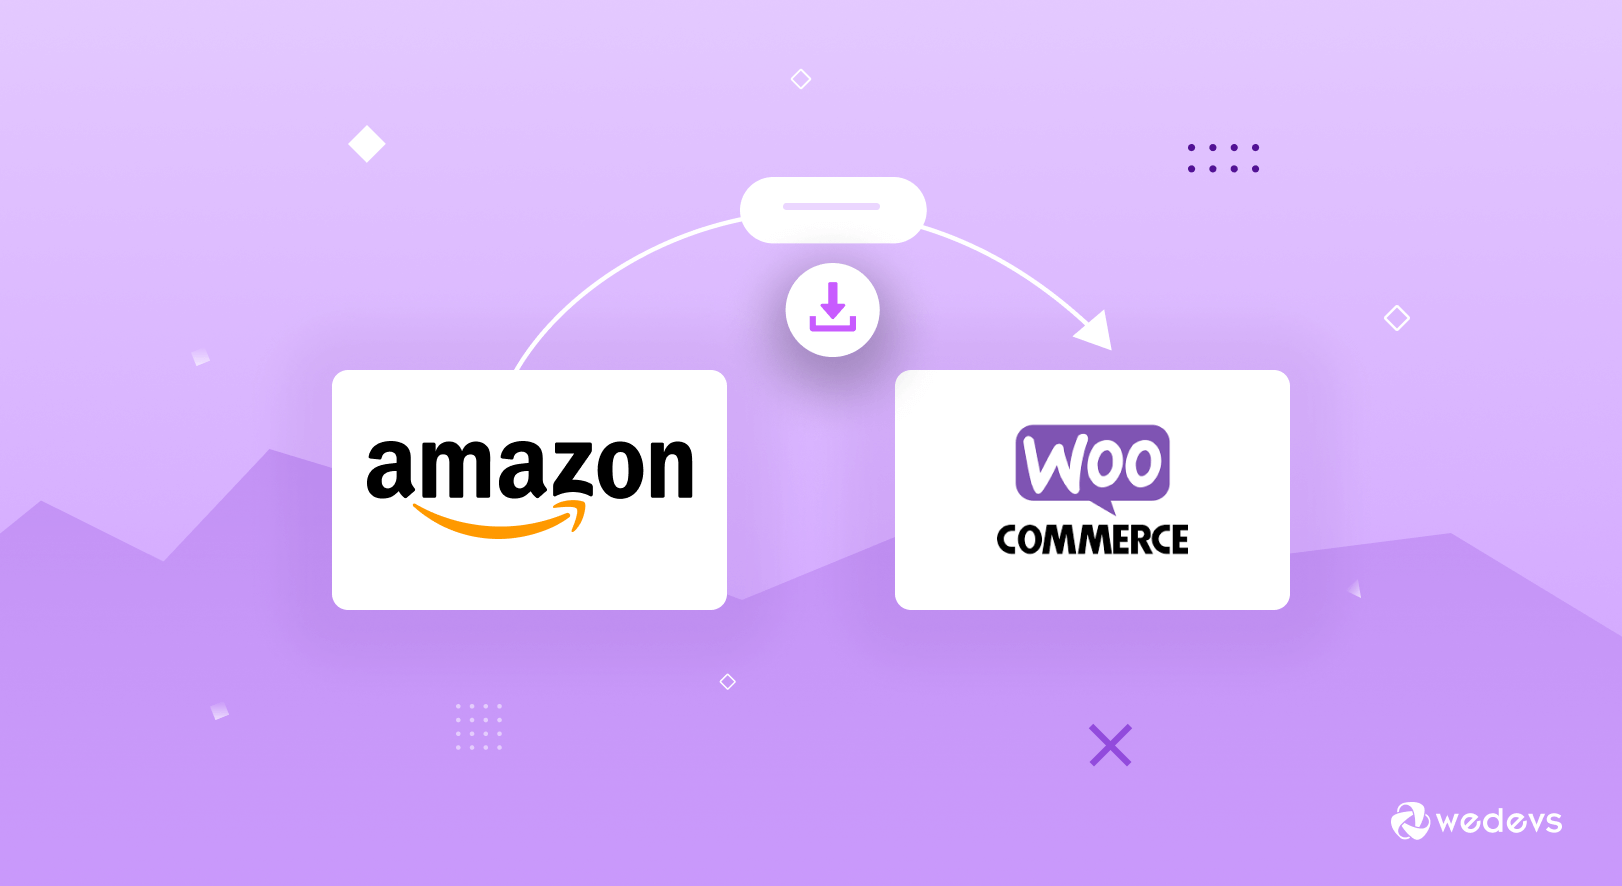 How To Import Amazon Products To WooCommerce- The Easy Way